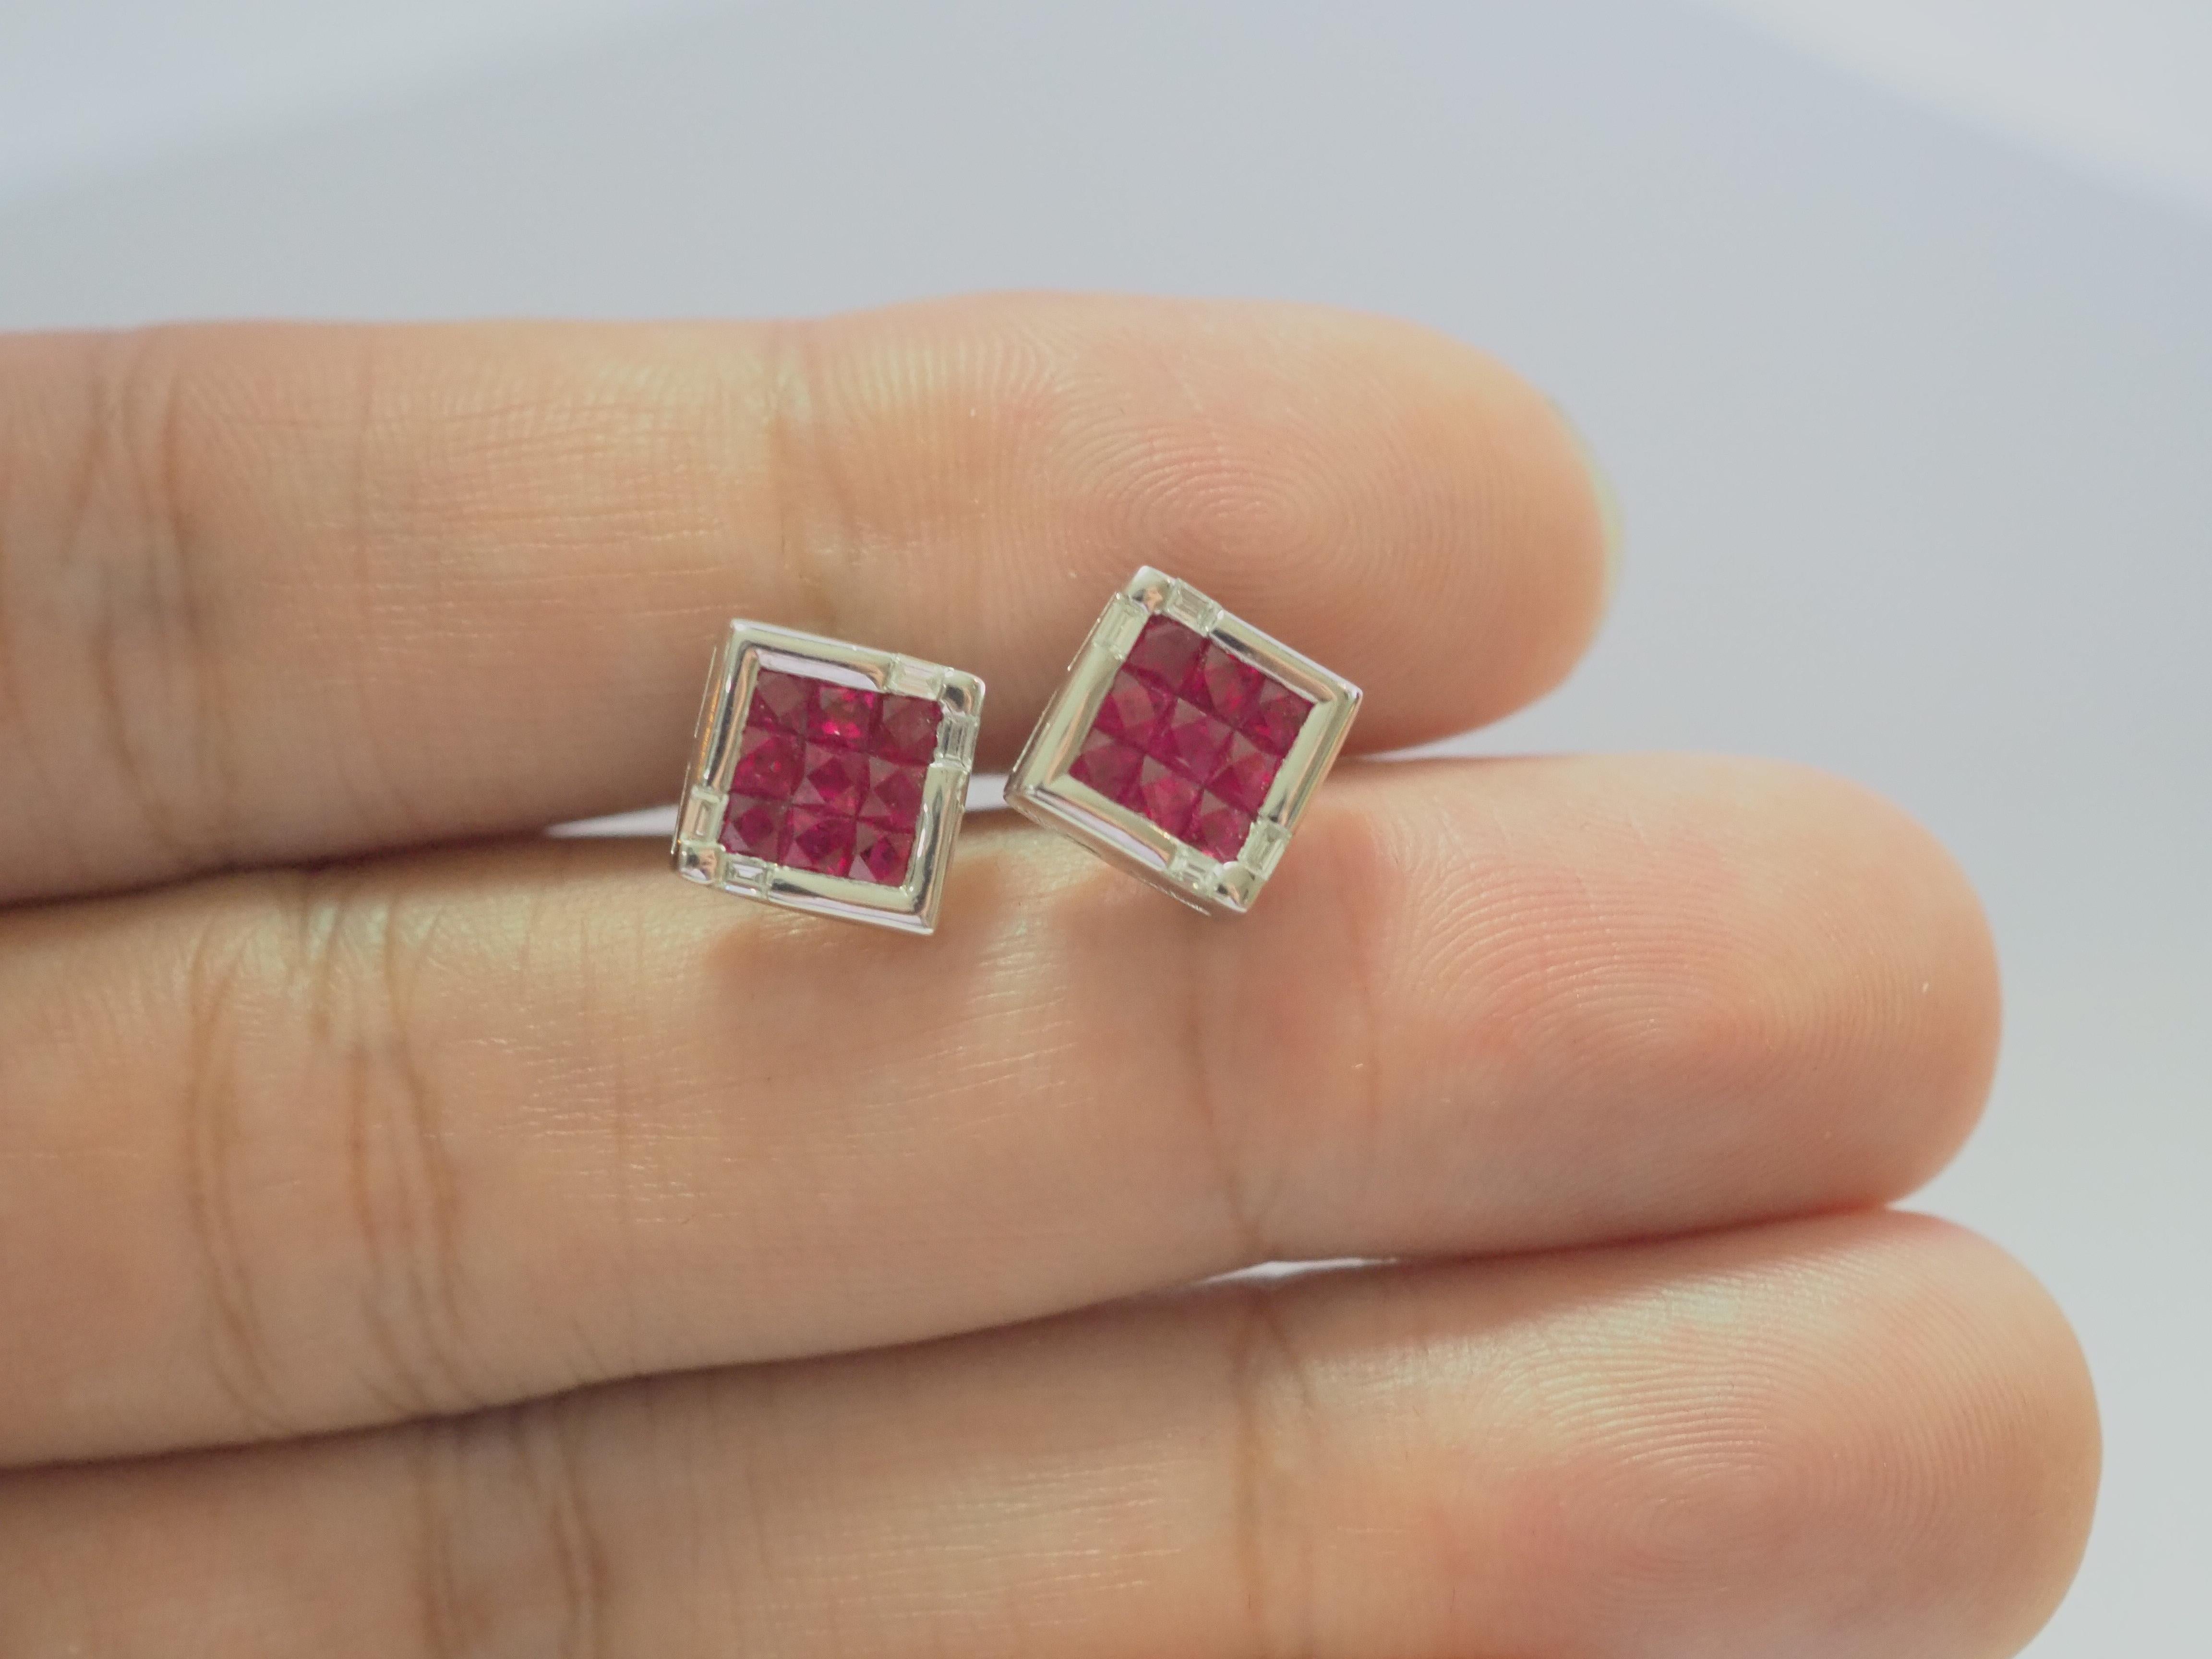 18k White Gold 2.21ct Square Ruby & 0.18ct Baguette Diamond Stud Earring For Sale 2